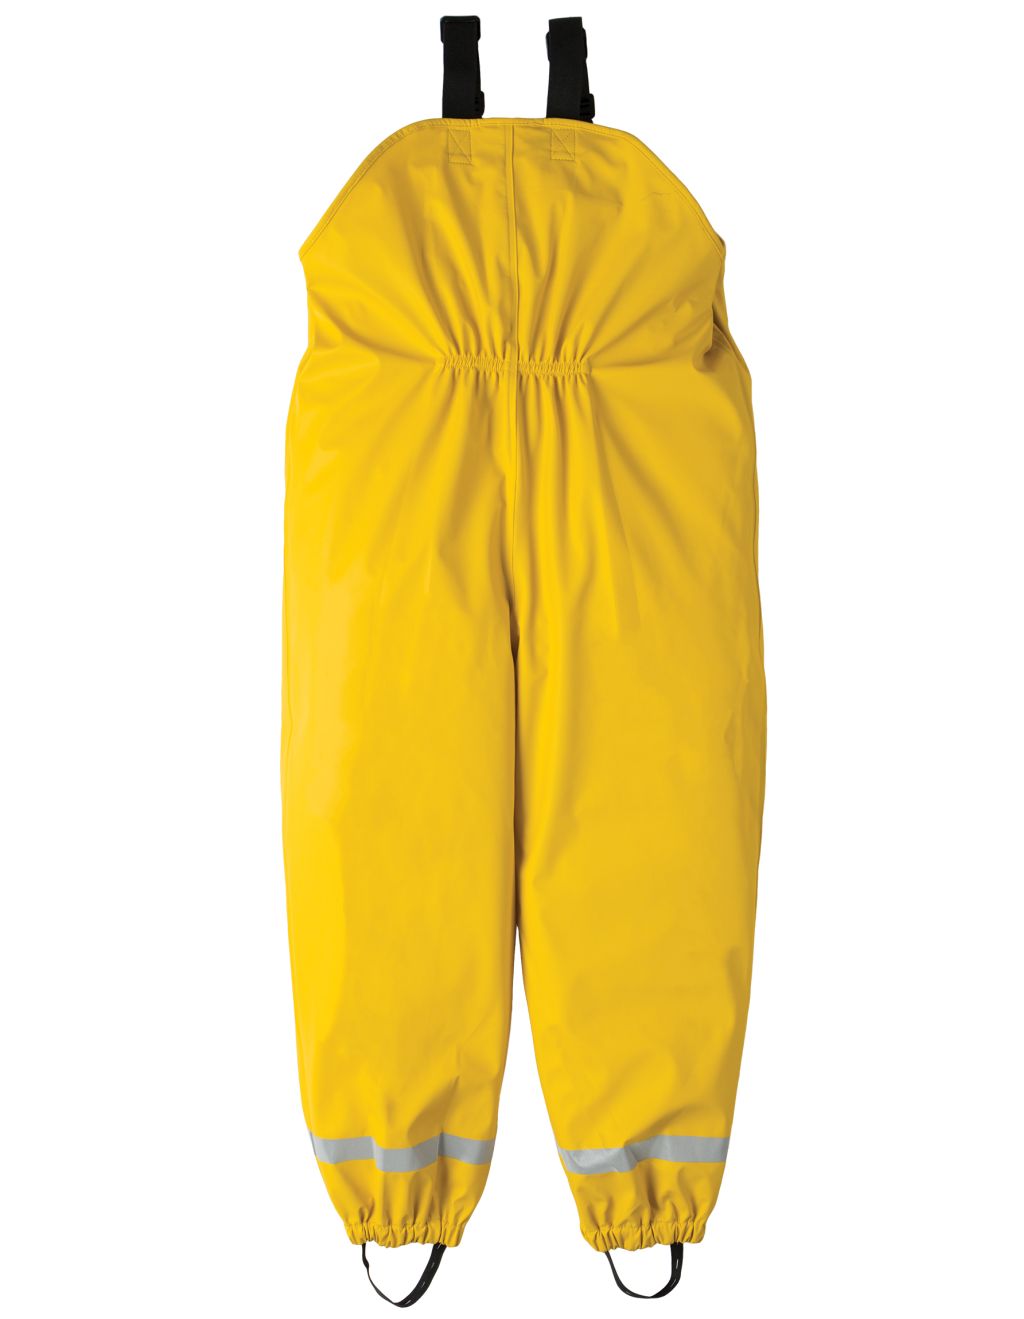 Puddle Buster Trousers Gorse 122/128